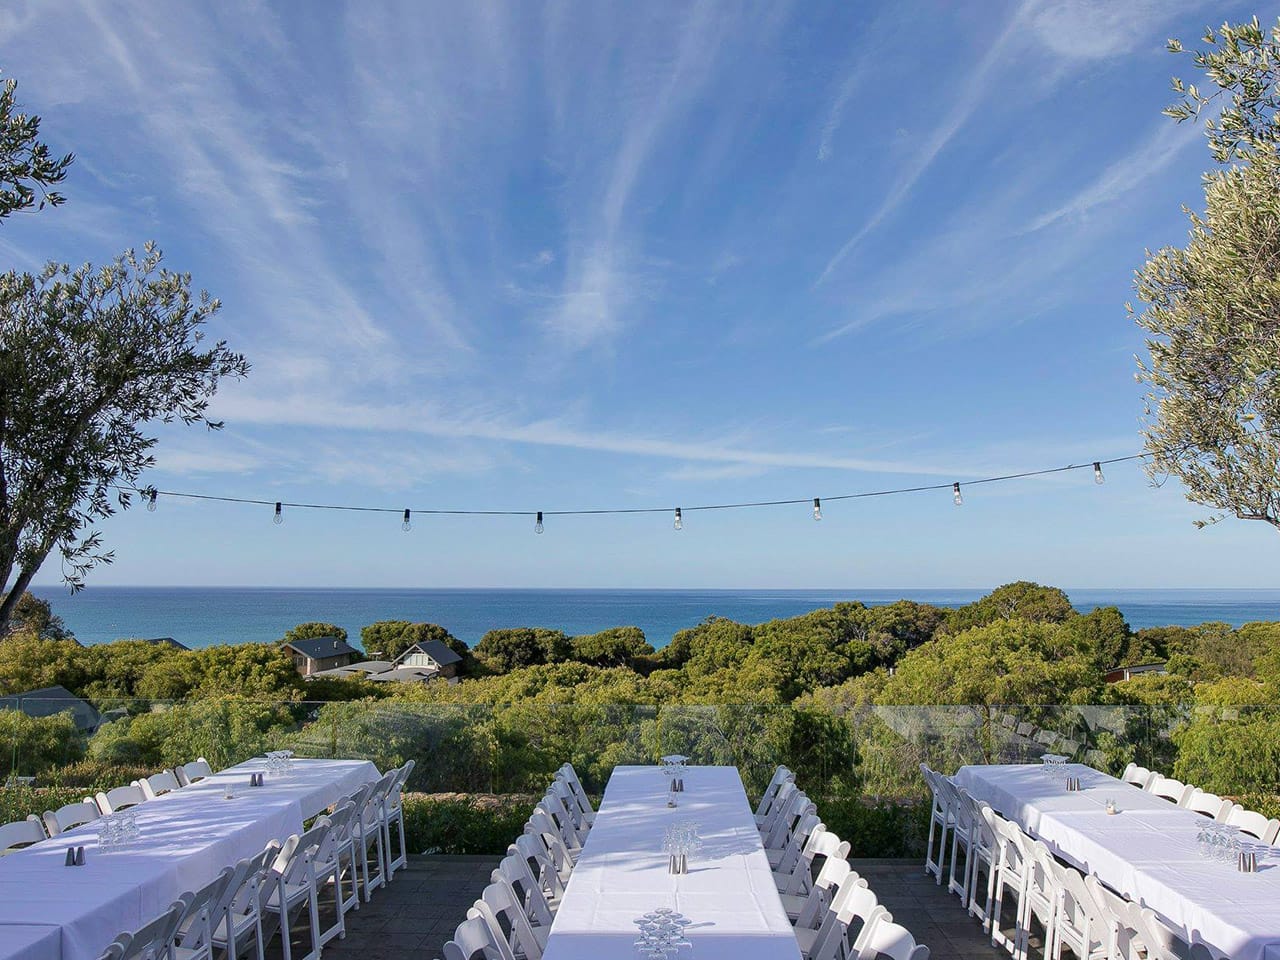 A Wedding Dinner Tables Set Up With The Ocean In The Background.